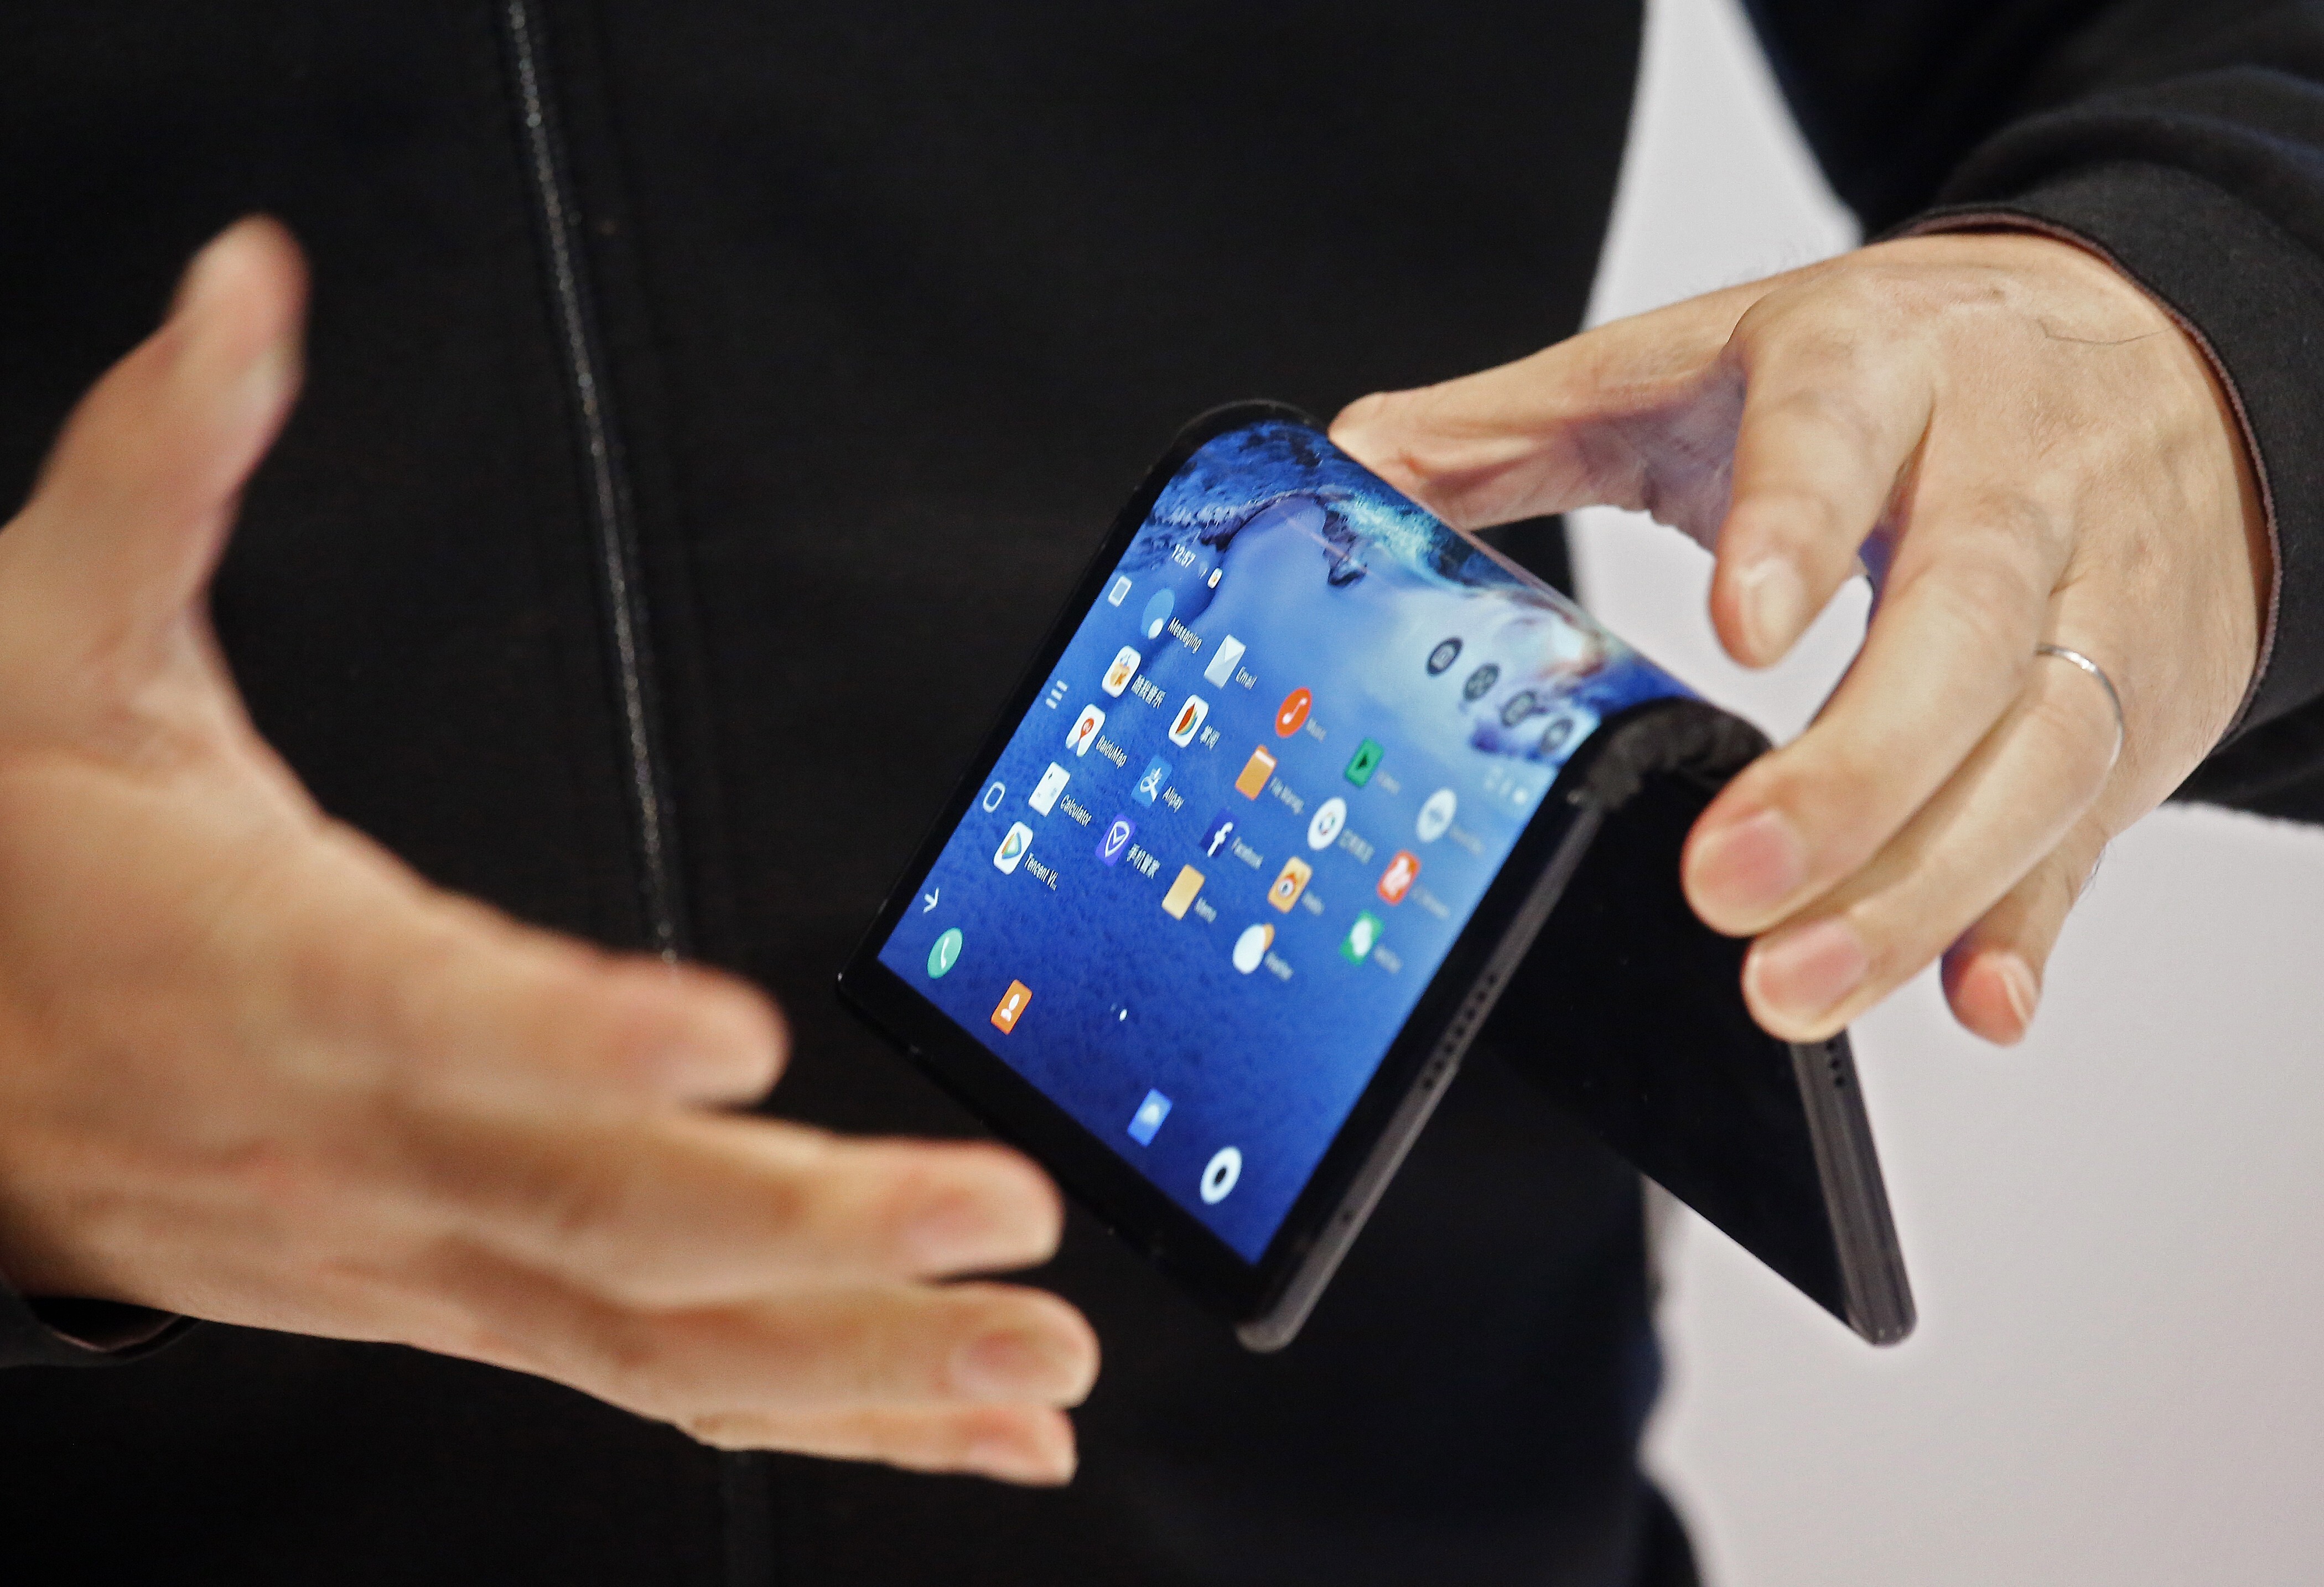 Royole Corp shows off its FlexPai foldable smartphone and tablet during the CES trade show held in Las Vegas, Nevada, in January of last year. Photo: EPA-EFE